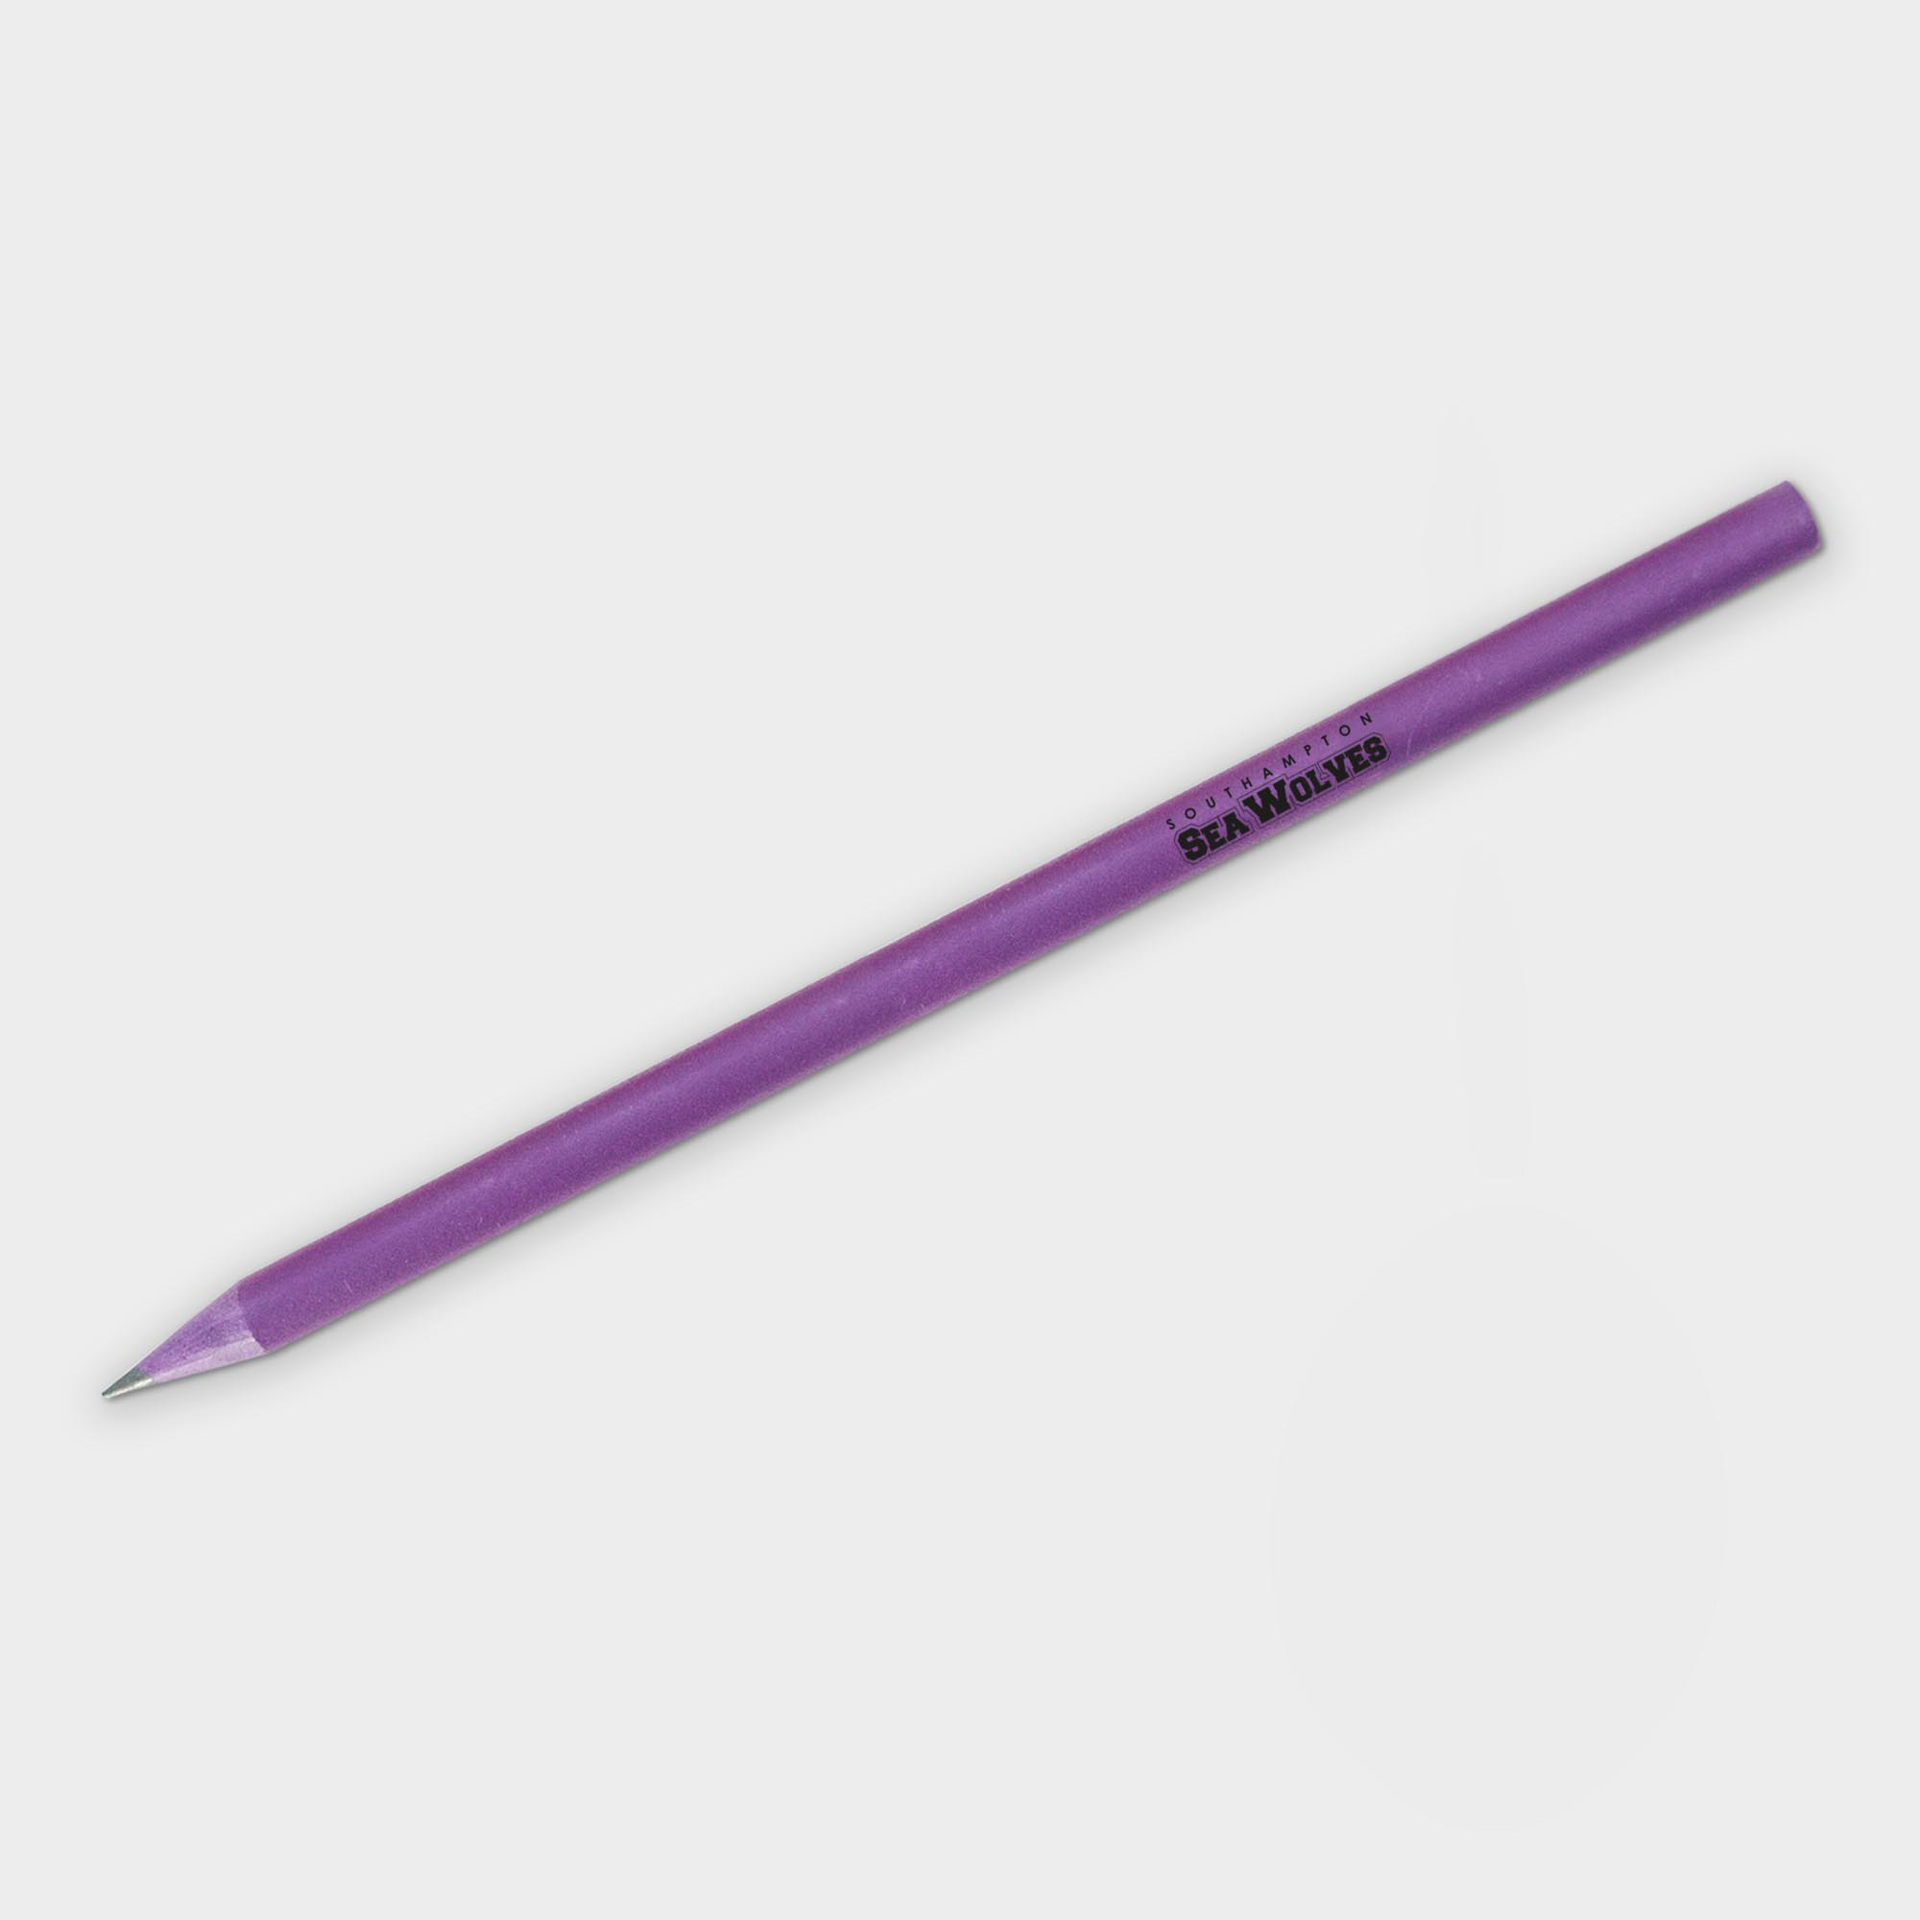 Recycled CD Pencil in purple with 1 colour print